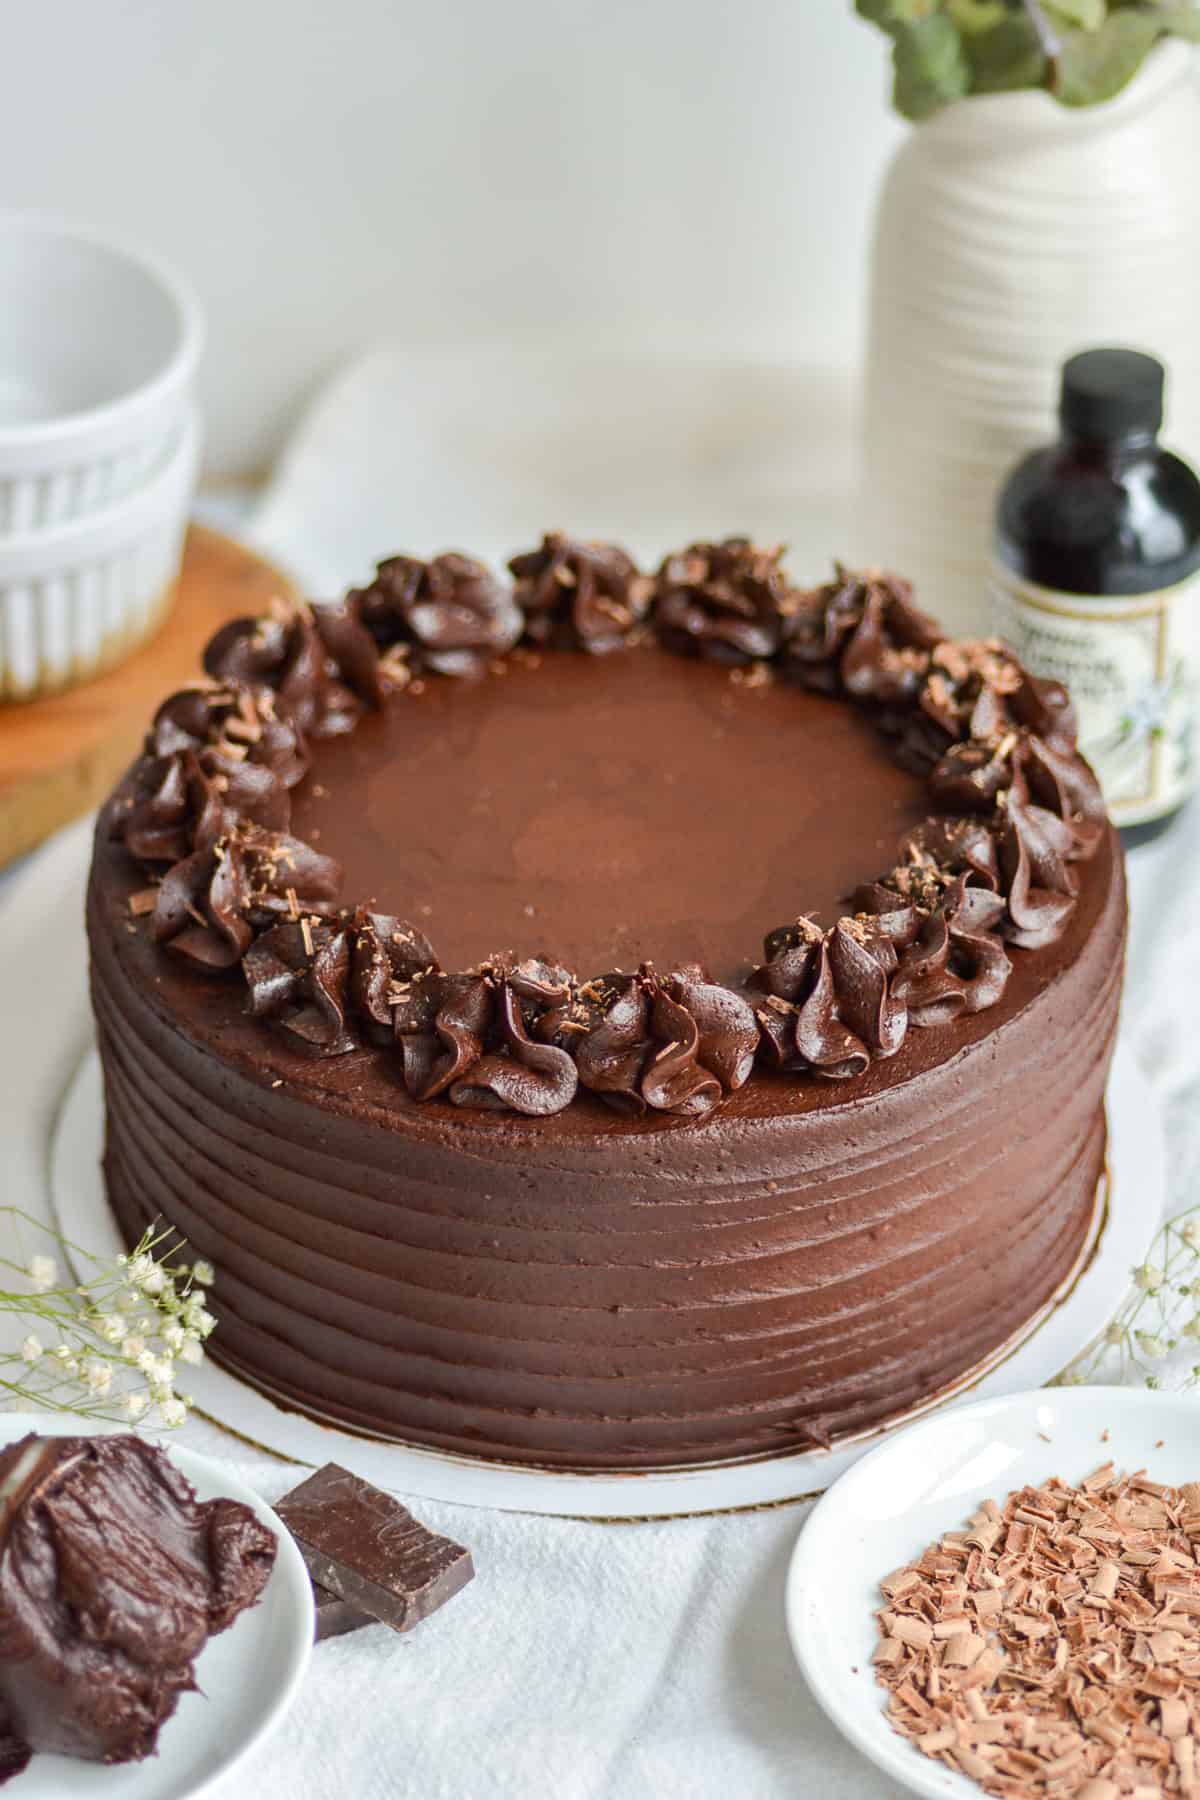 A round Vegan Gluten Free Chocolate Cake with shaved chocolate on top. Its placed on a cloth with a bowl of shaved chocolate in front.